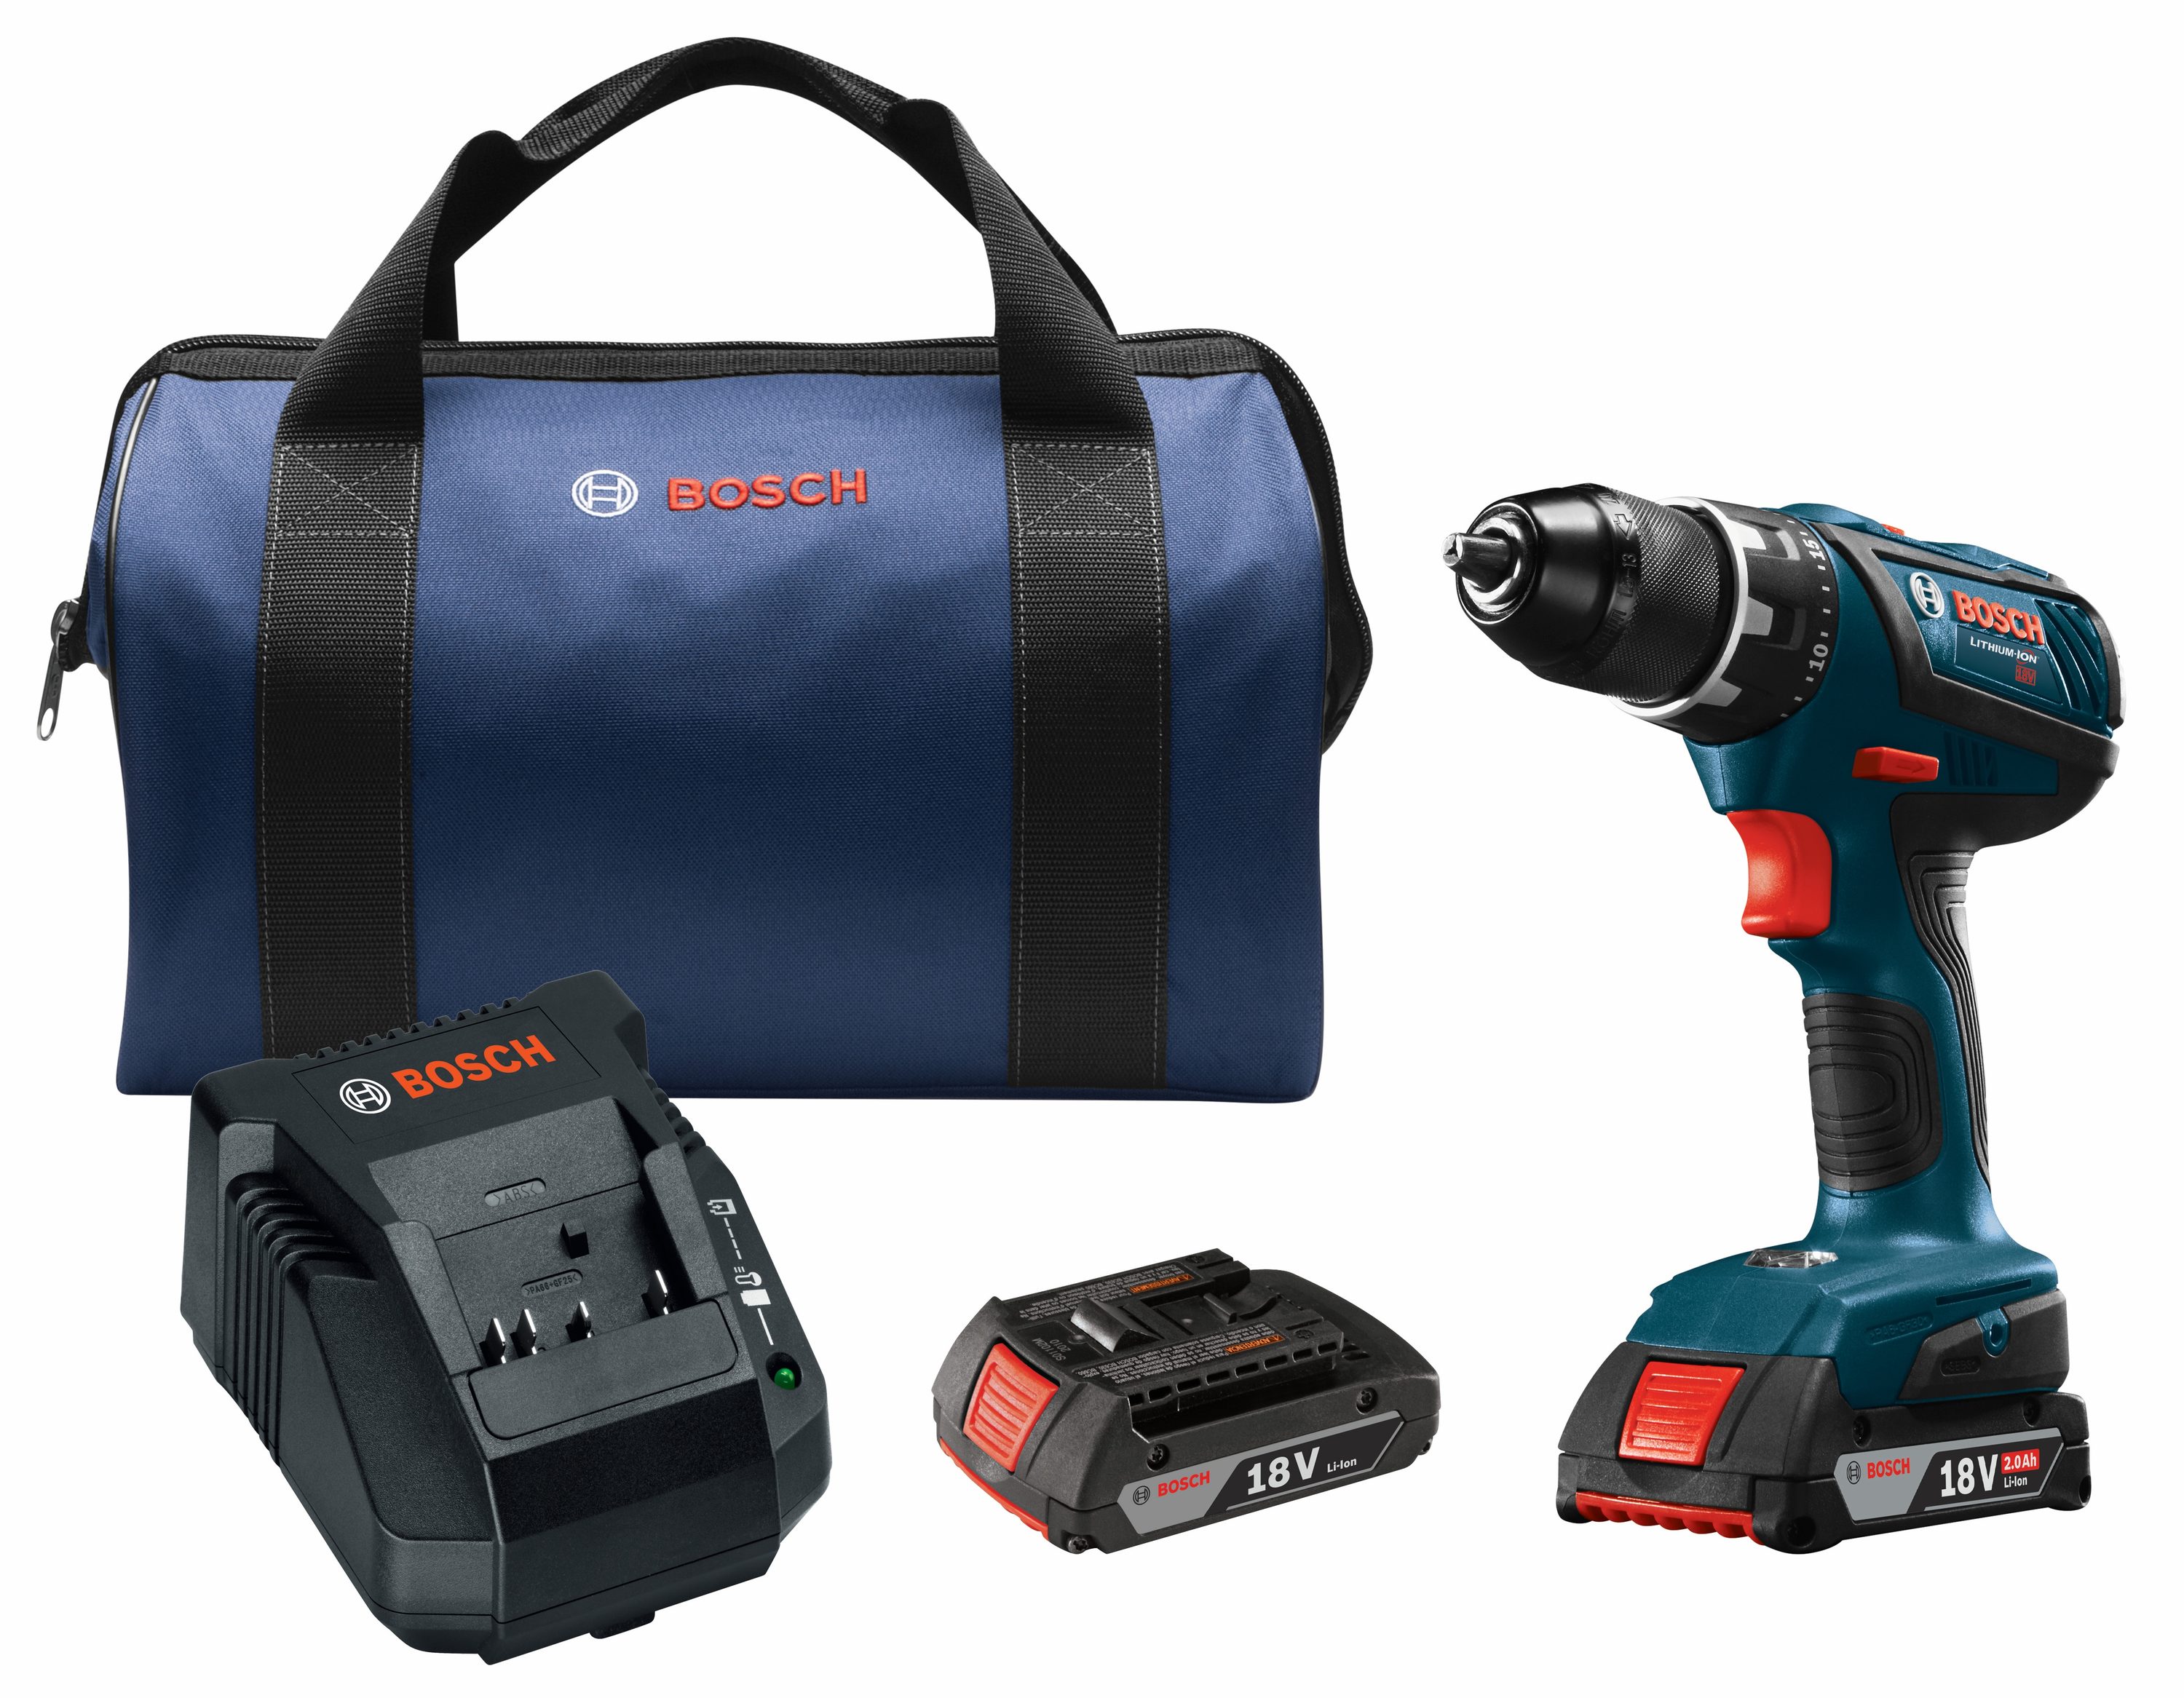 Bosch 18-volt 1/2-in Keyless Brushless Right Angle Cordless Drill  (1-Battery Included, Charger Included and Soft Bag included)